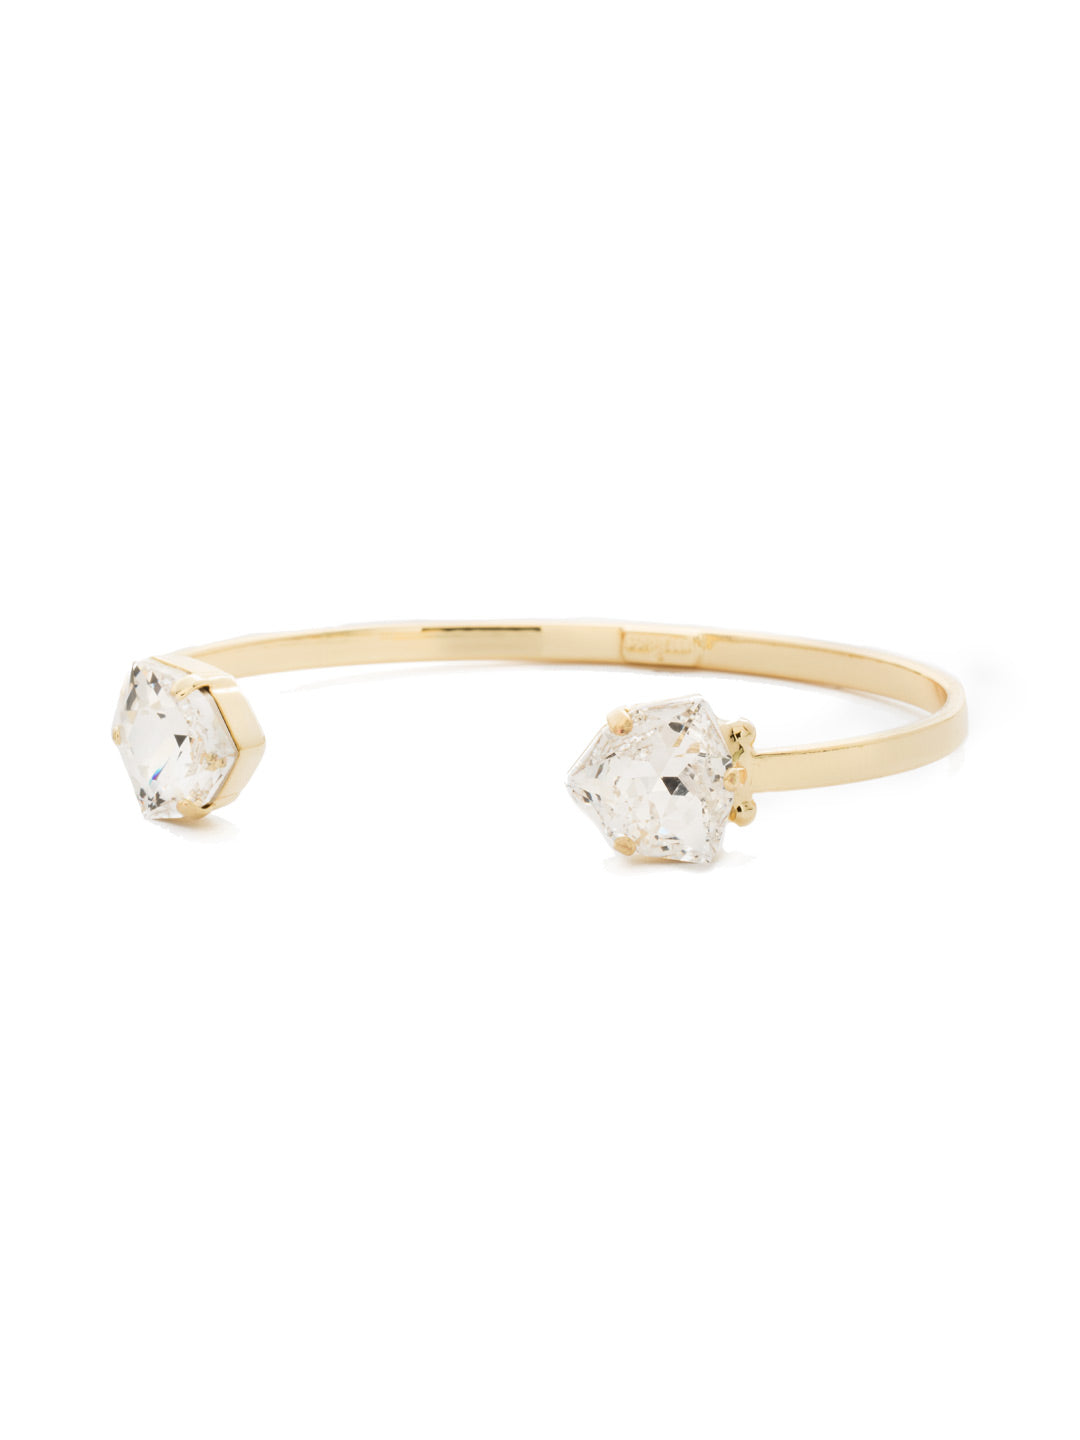 Product Image: Perfectly Pretty Cuff Bracelet